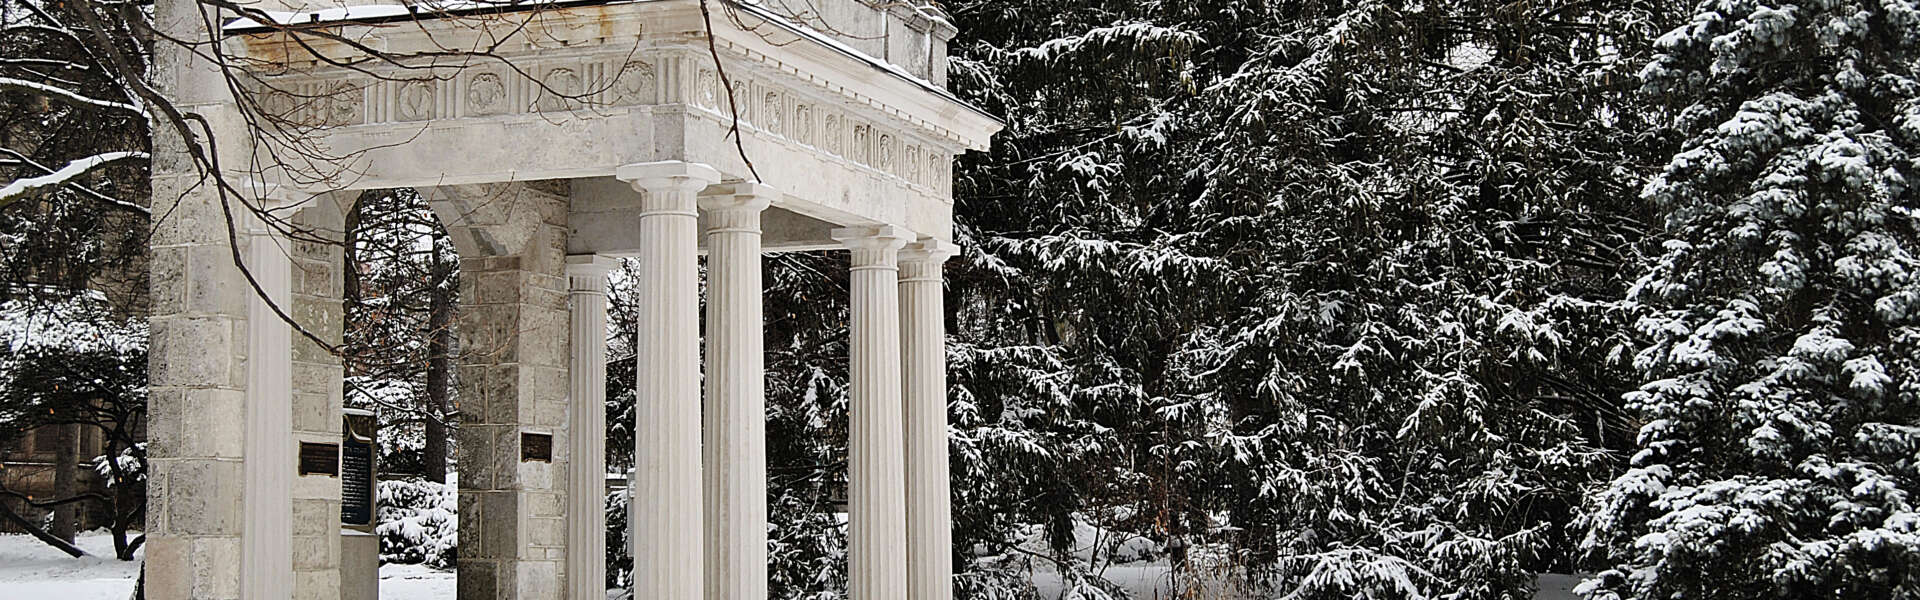 The portico on the U of G campus